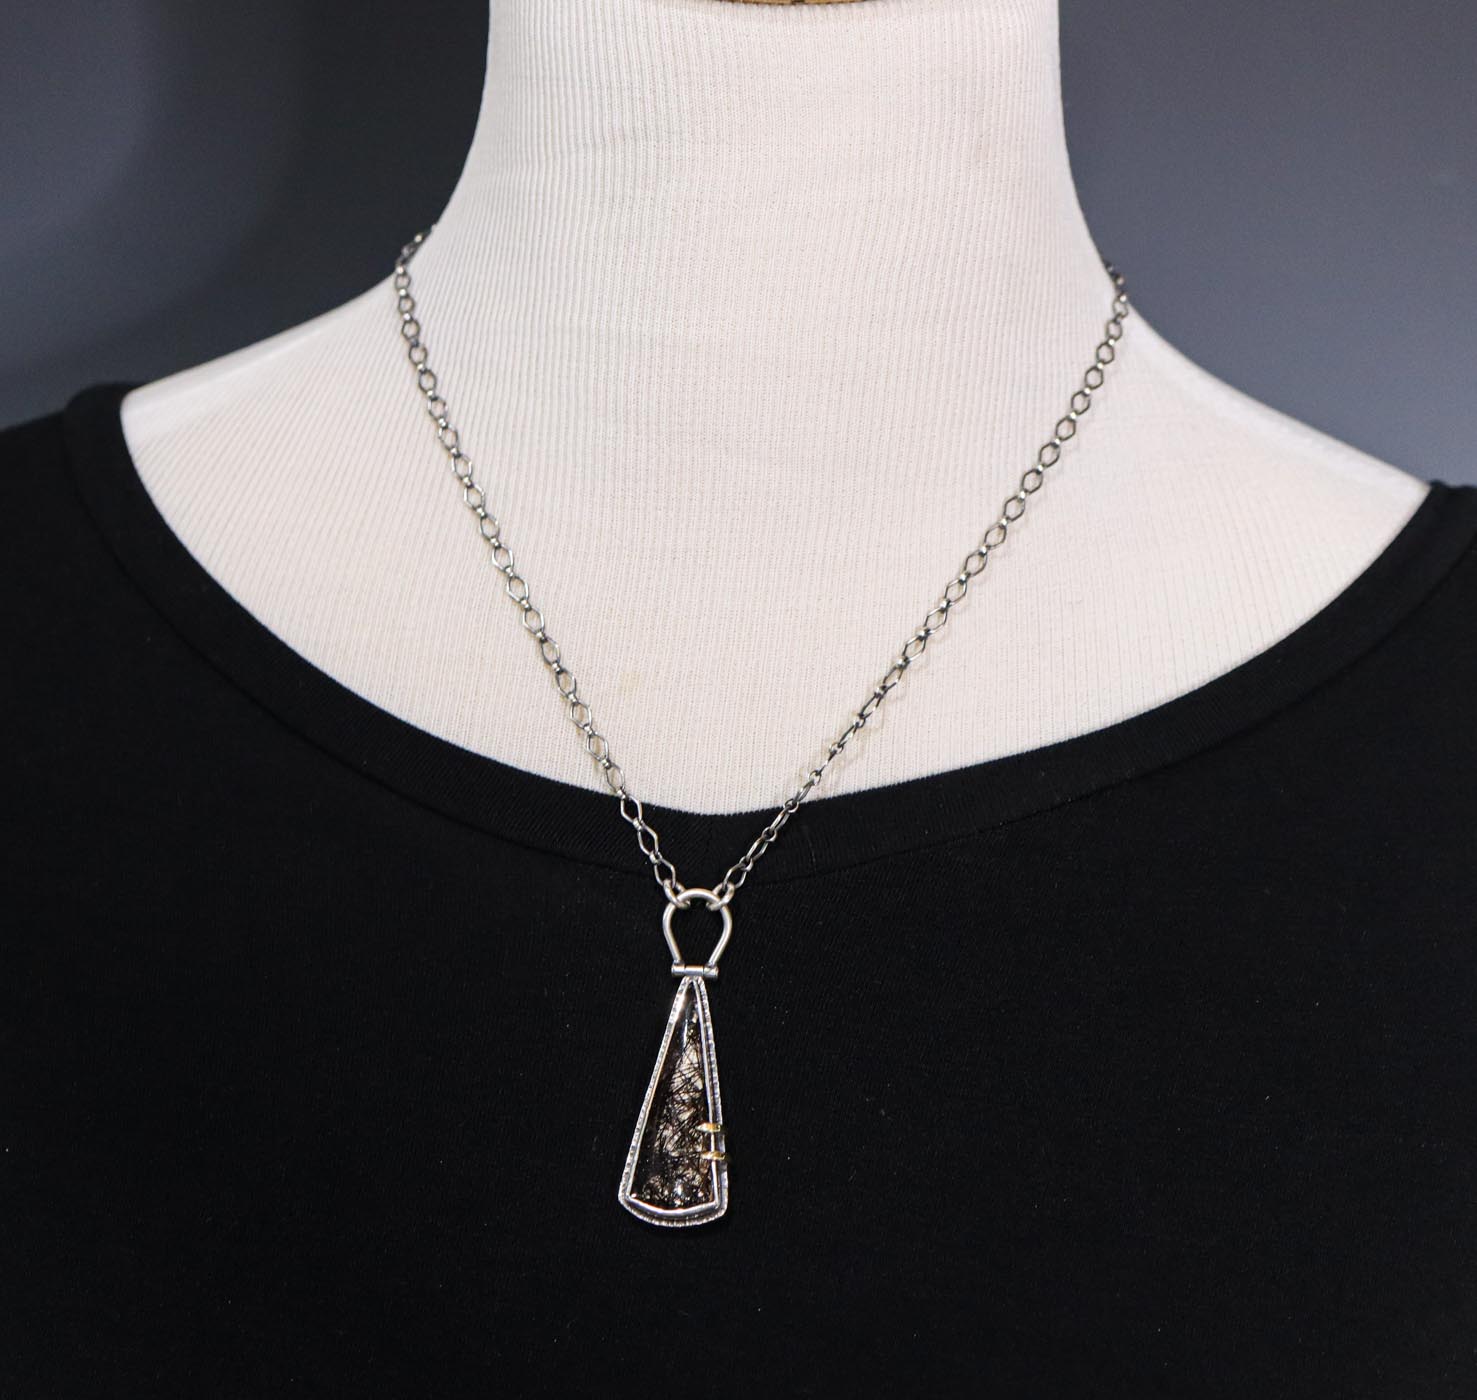 Black Tourmalinated Quartz Or Black Rutile Pendant Necklace Sterling Silver and 18k Gold